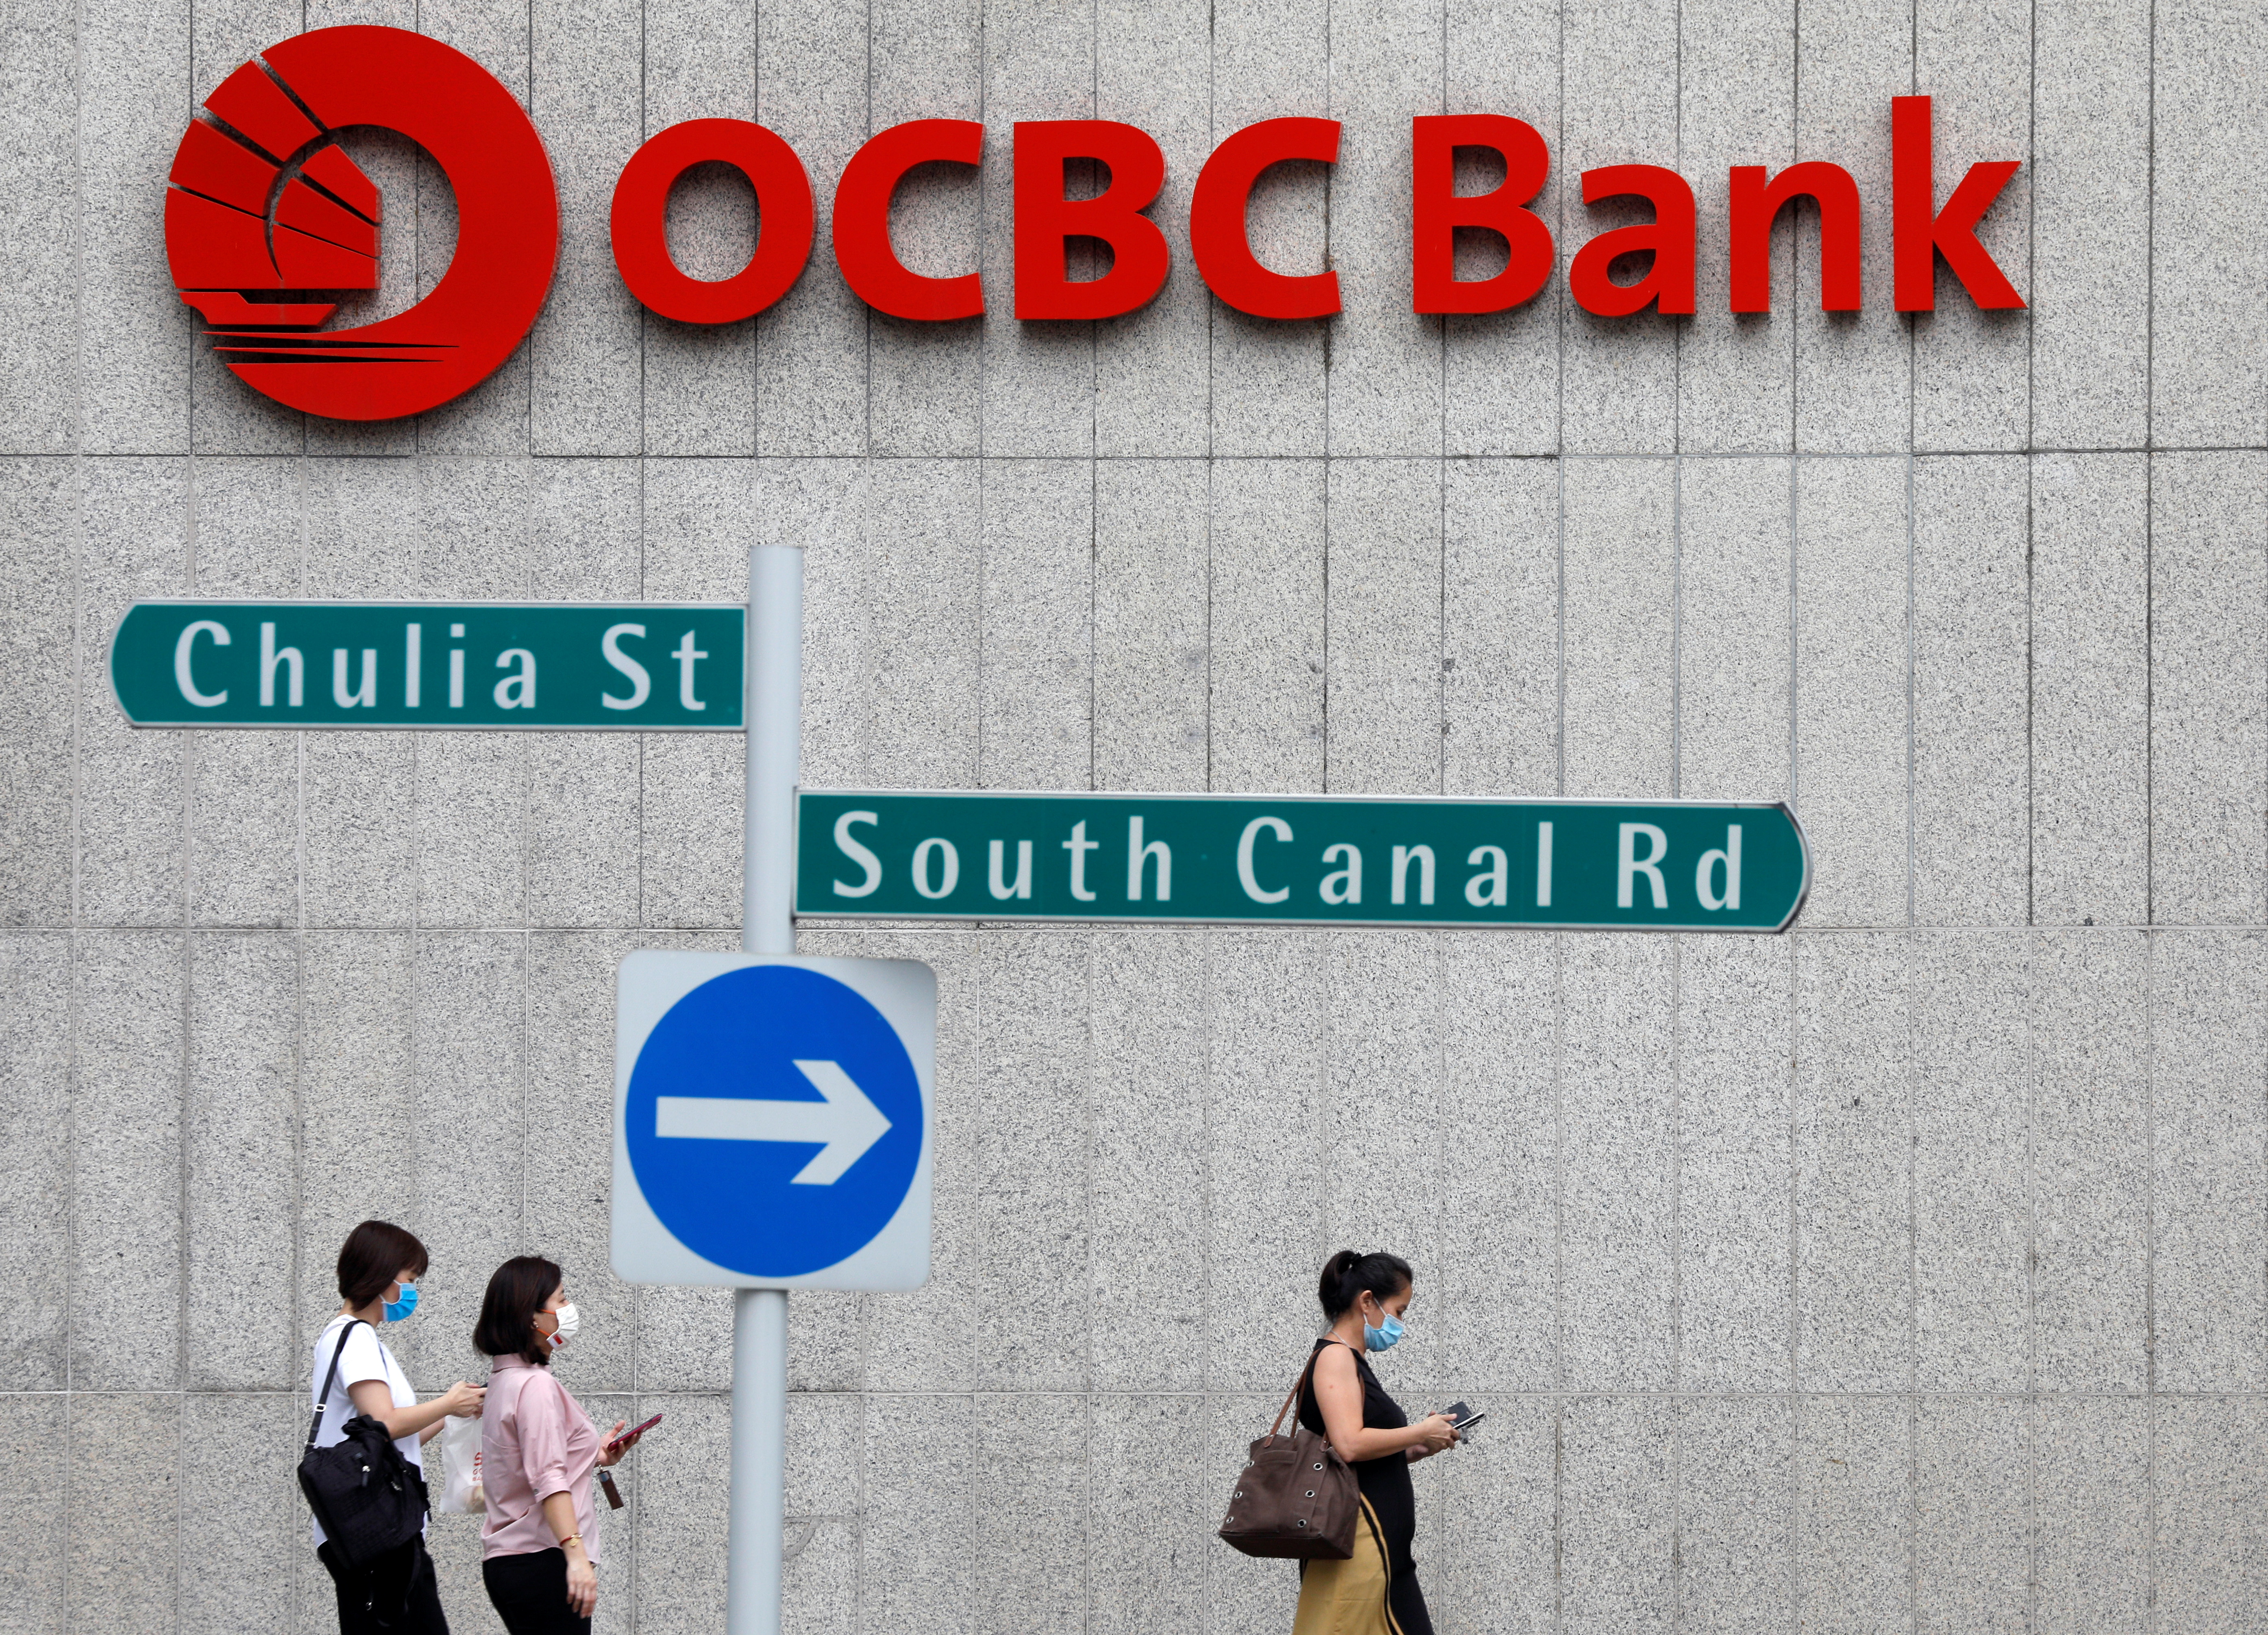 People pass by an OCBC bank branch in Singapore